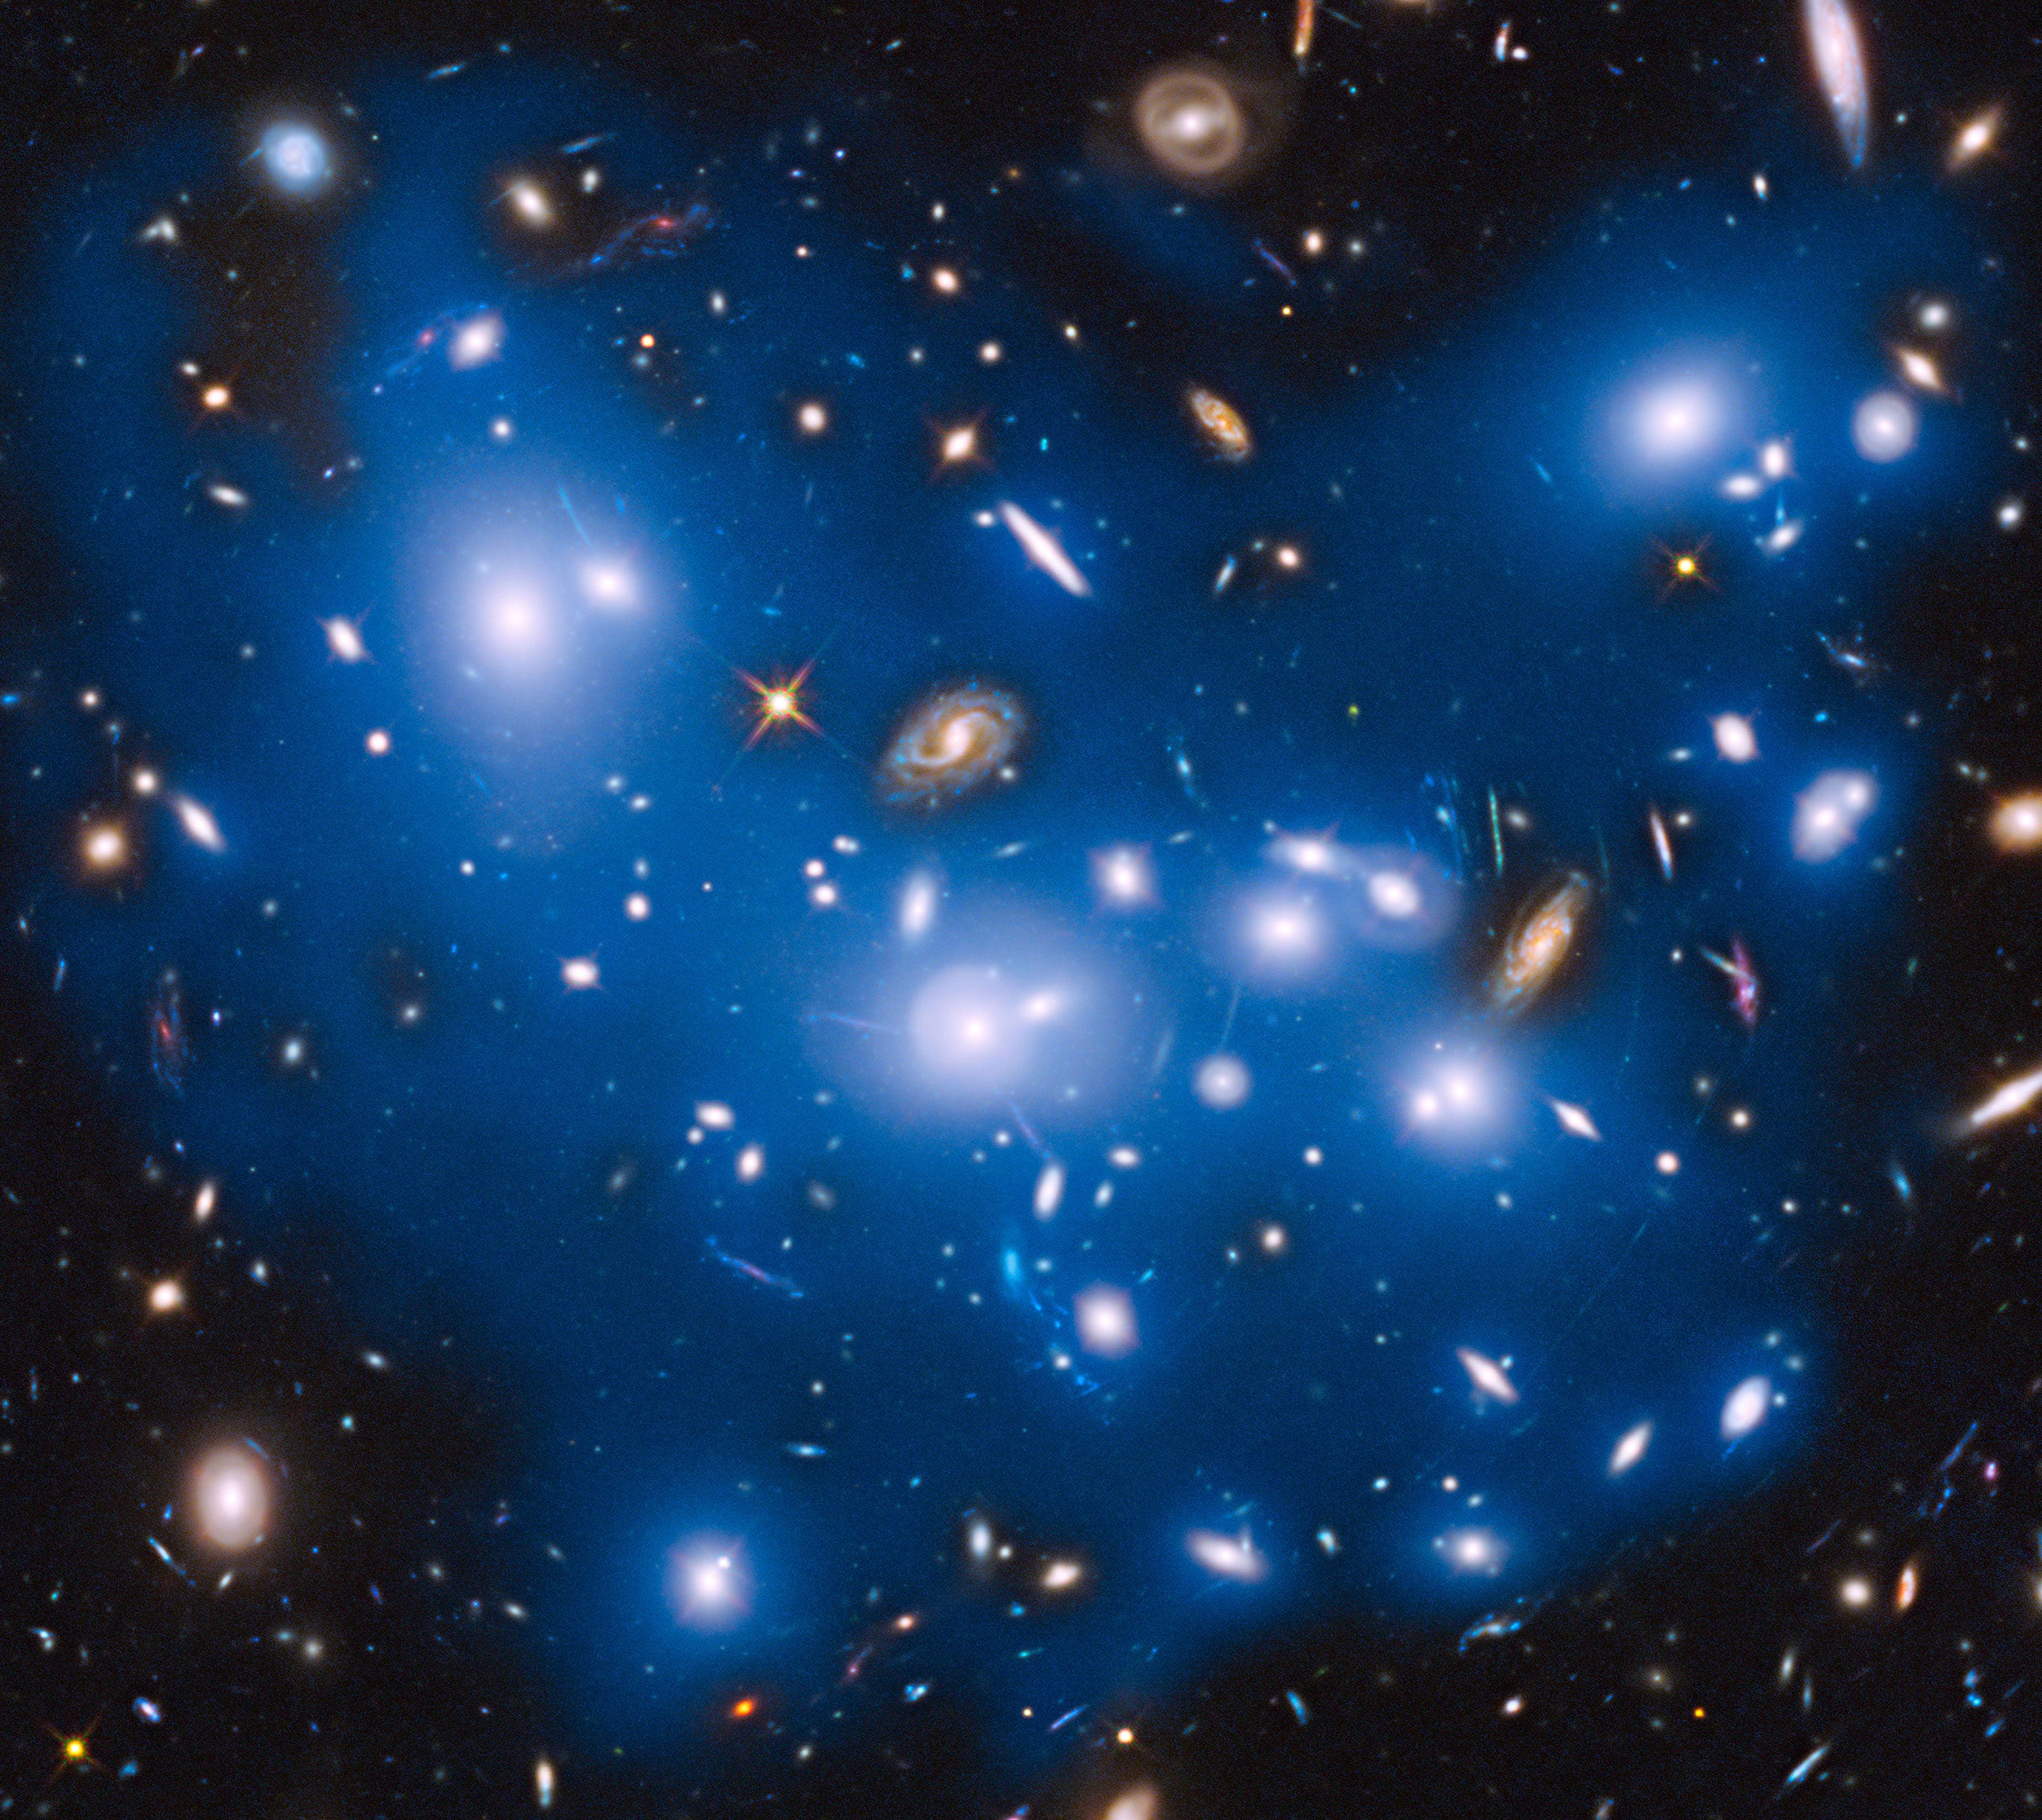 Galaxy cluster Abell 2744 aka Pandora's Cluster. This image has been roated 90 degrees but it's space - who knows which way is up?